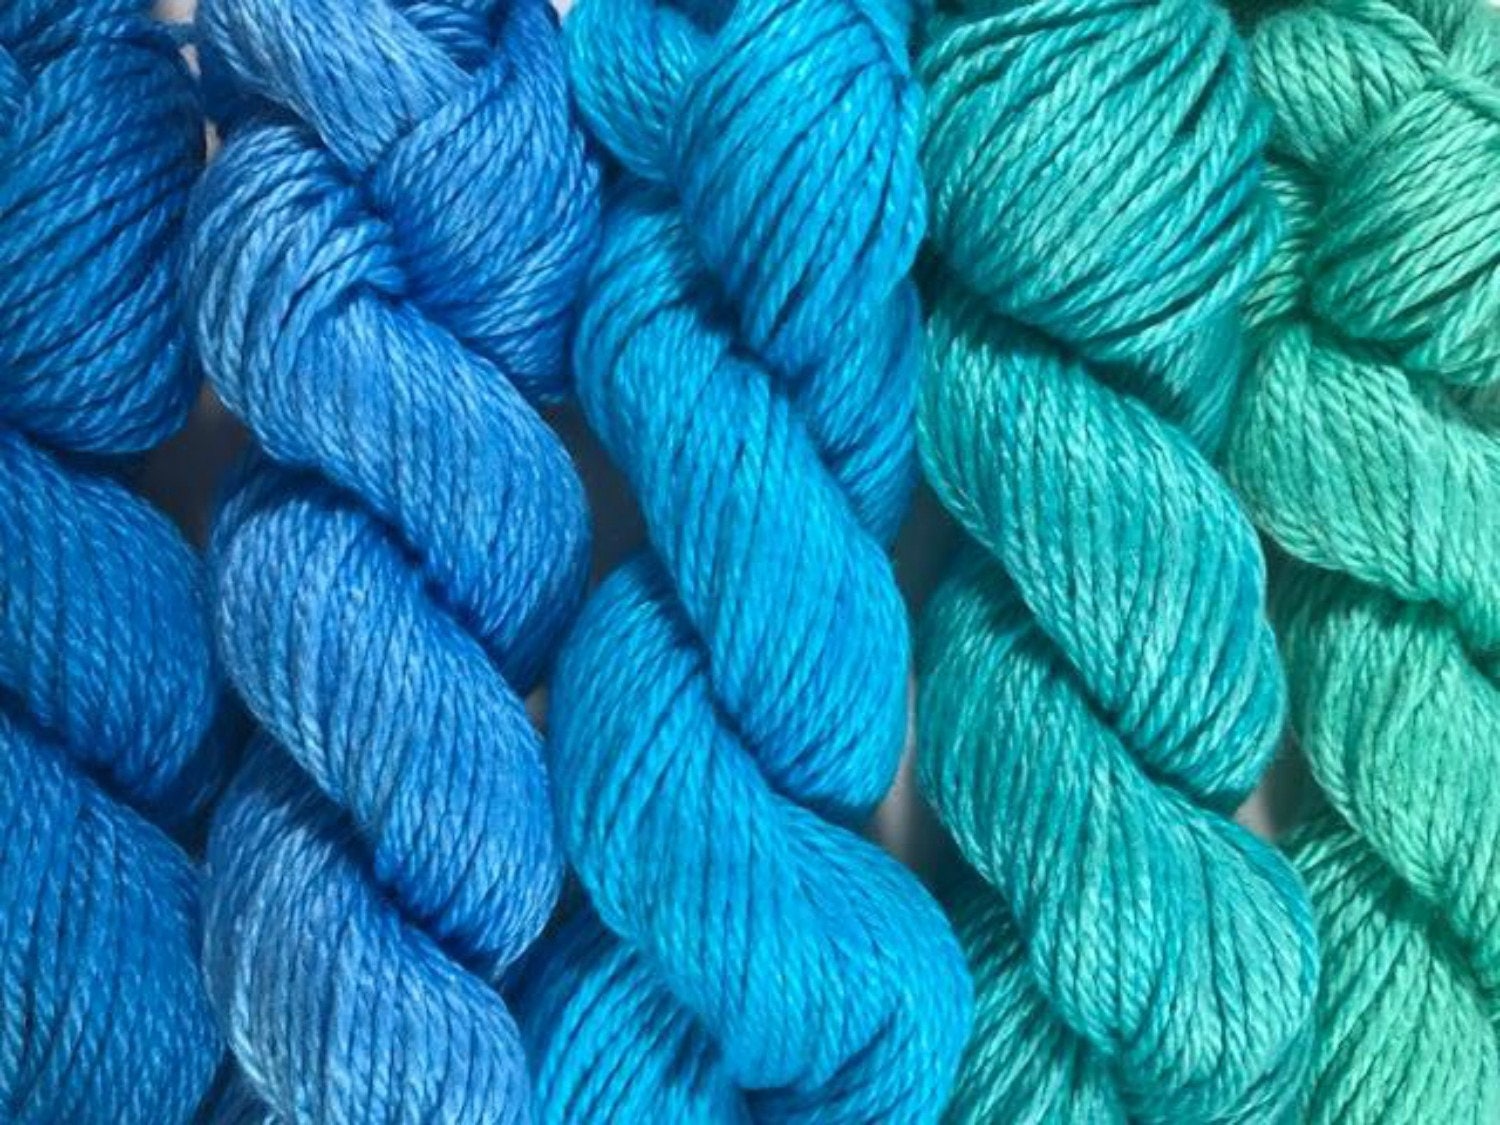 Bamboo Cotton Yarn - Hand Dyed - Teal Blue Gradient - DK Light Worsted - 3 Ply - Plant Based - Indie Dyed - Semi Solids - Vegan - Artisan